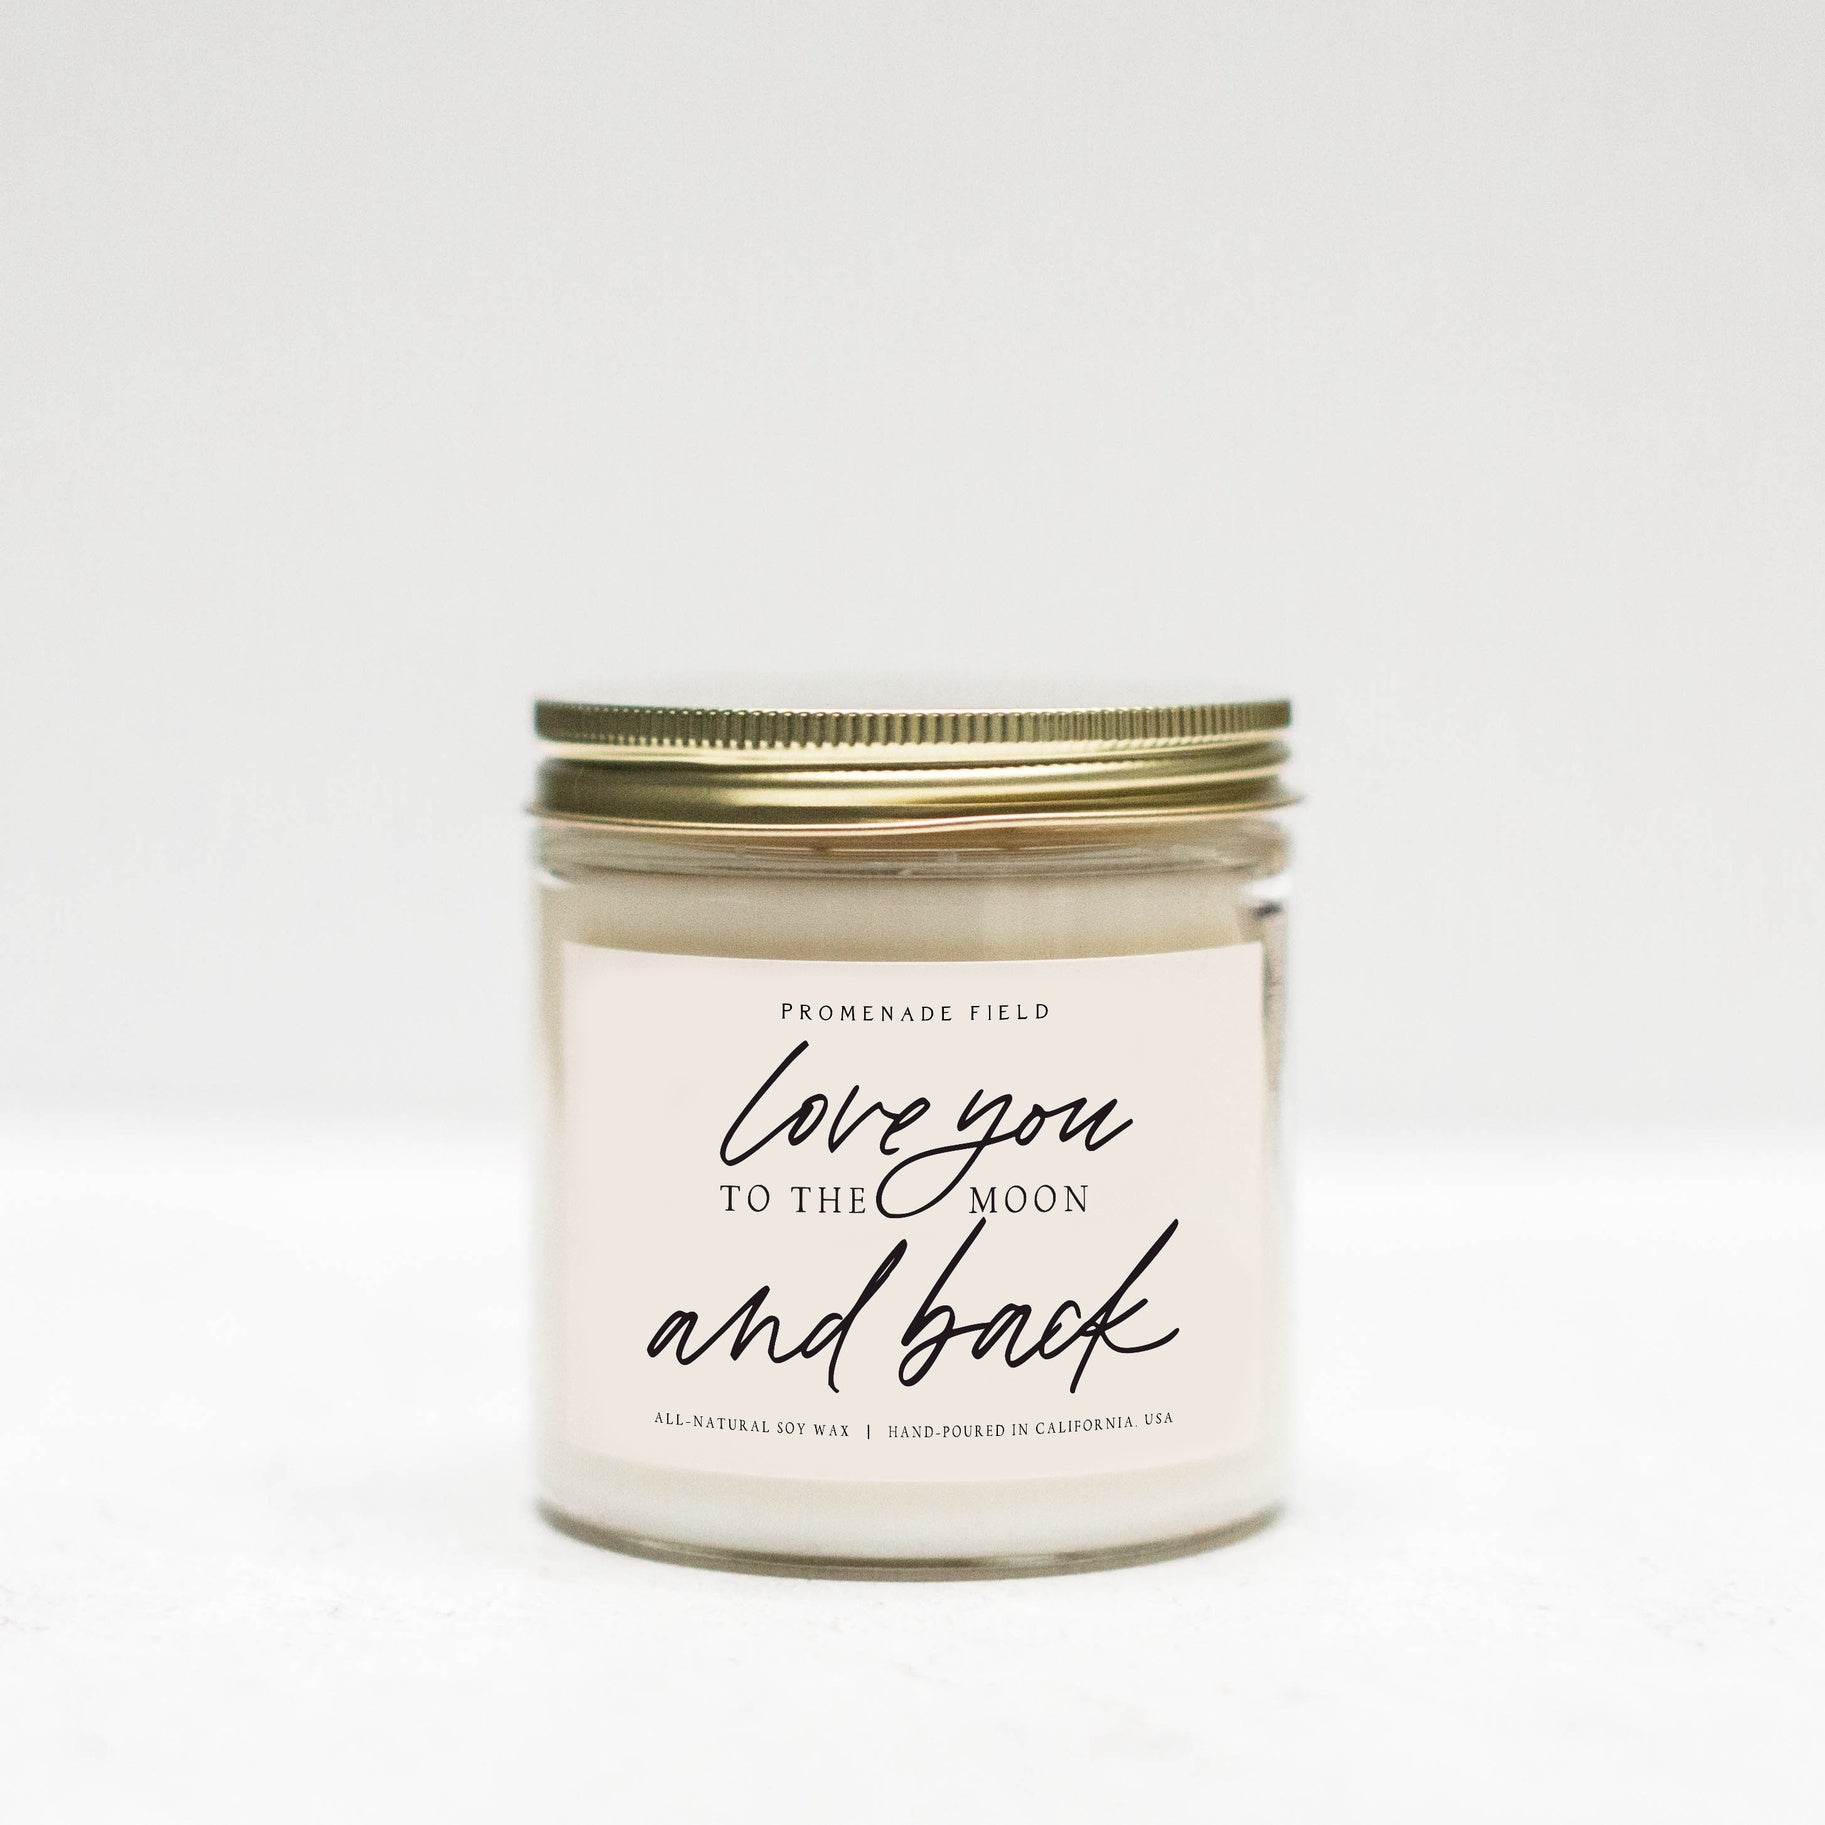 Jar candle with gold lid, white label which says &quot;Love you to the moon and back&quot; in cursive font.